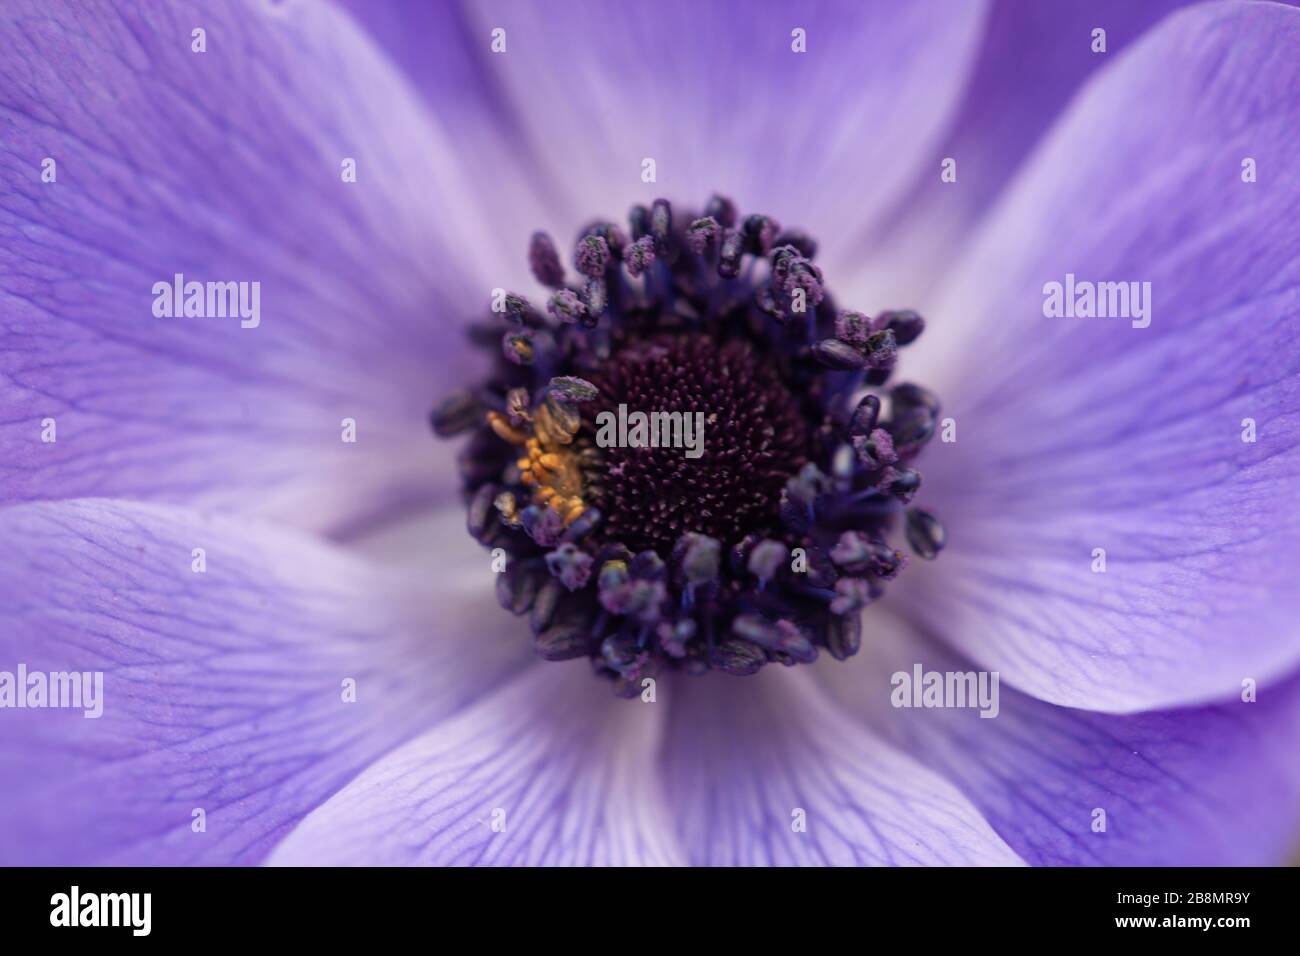 Flower macro - A natural world beauty - Violet-blue hues of Poppy Anemone / Anemone Coroania Stock Photo